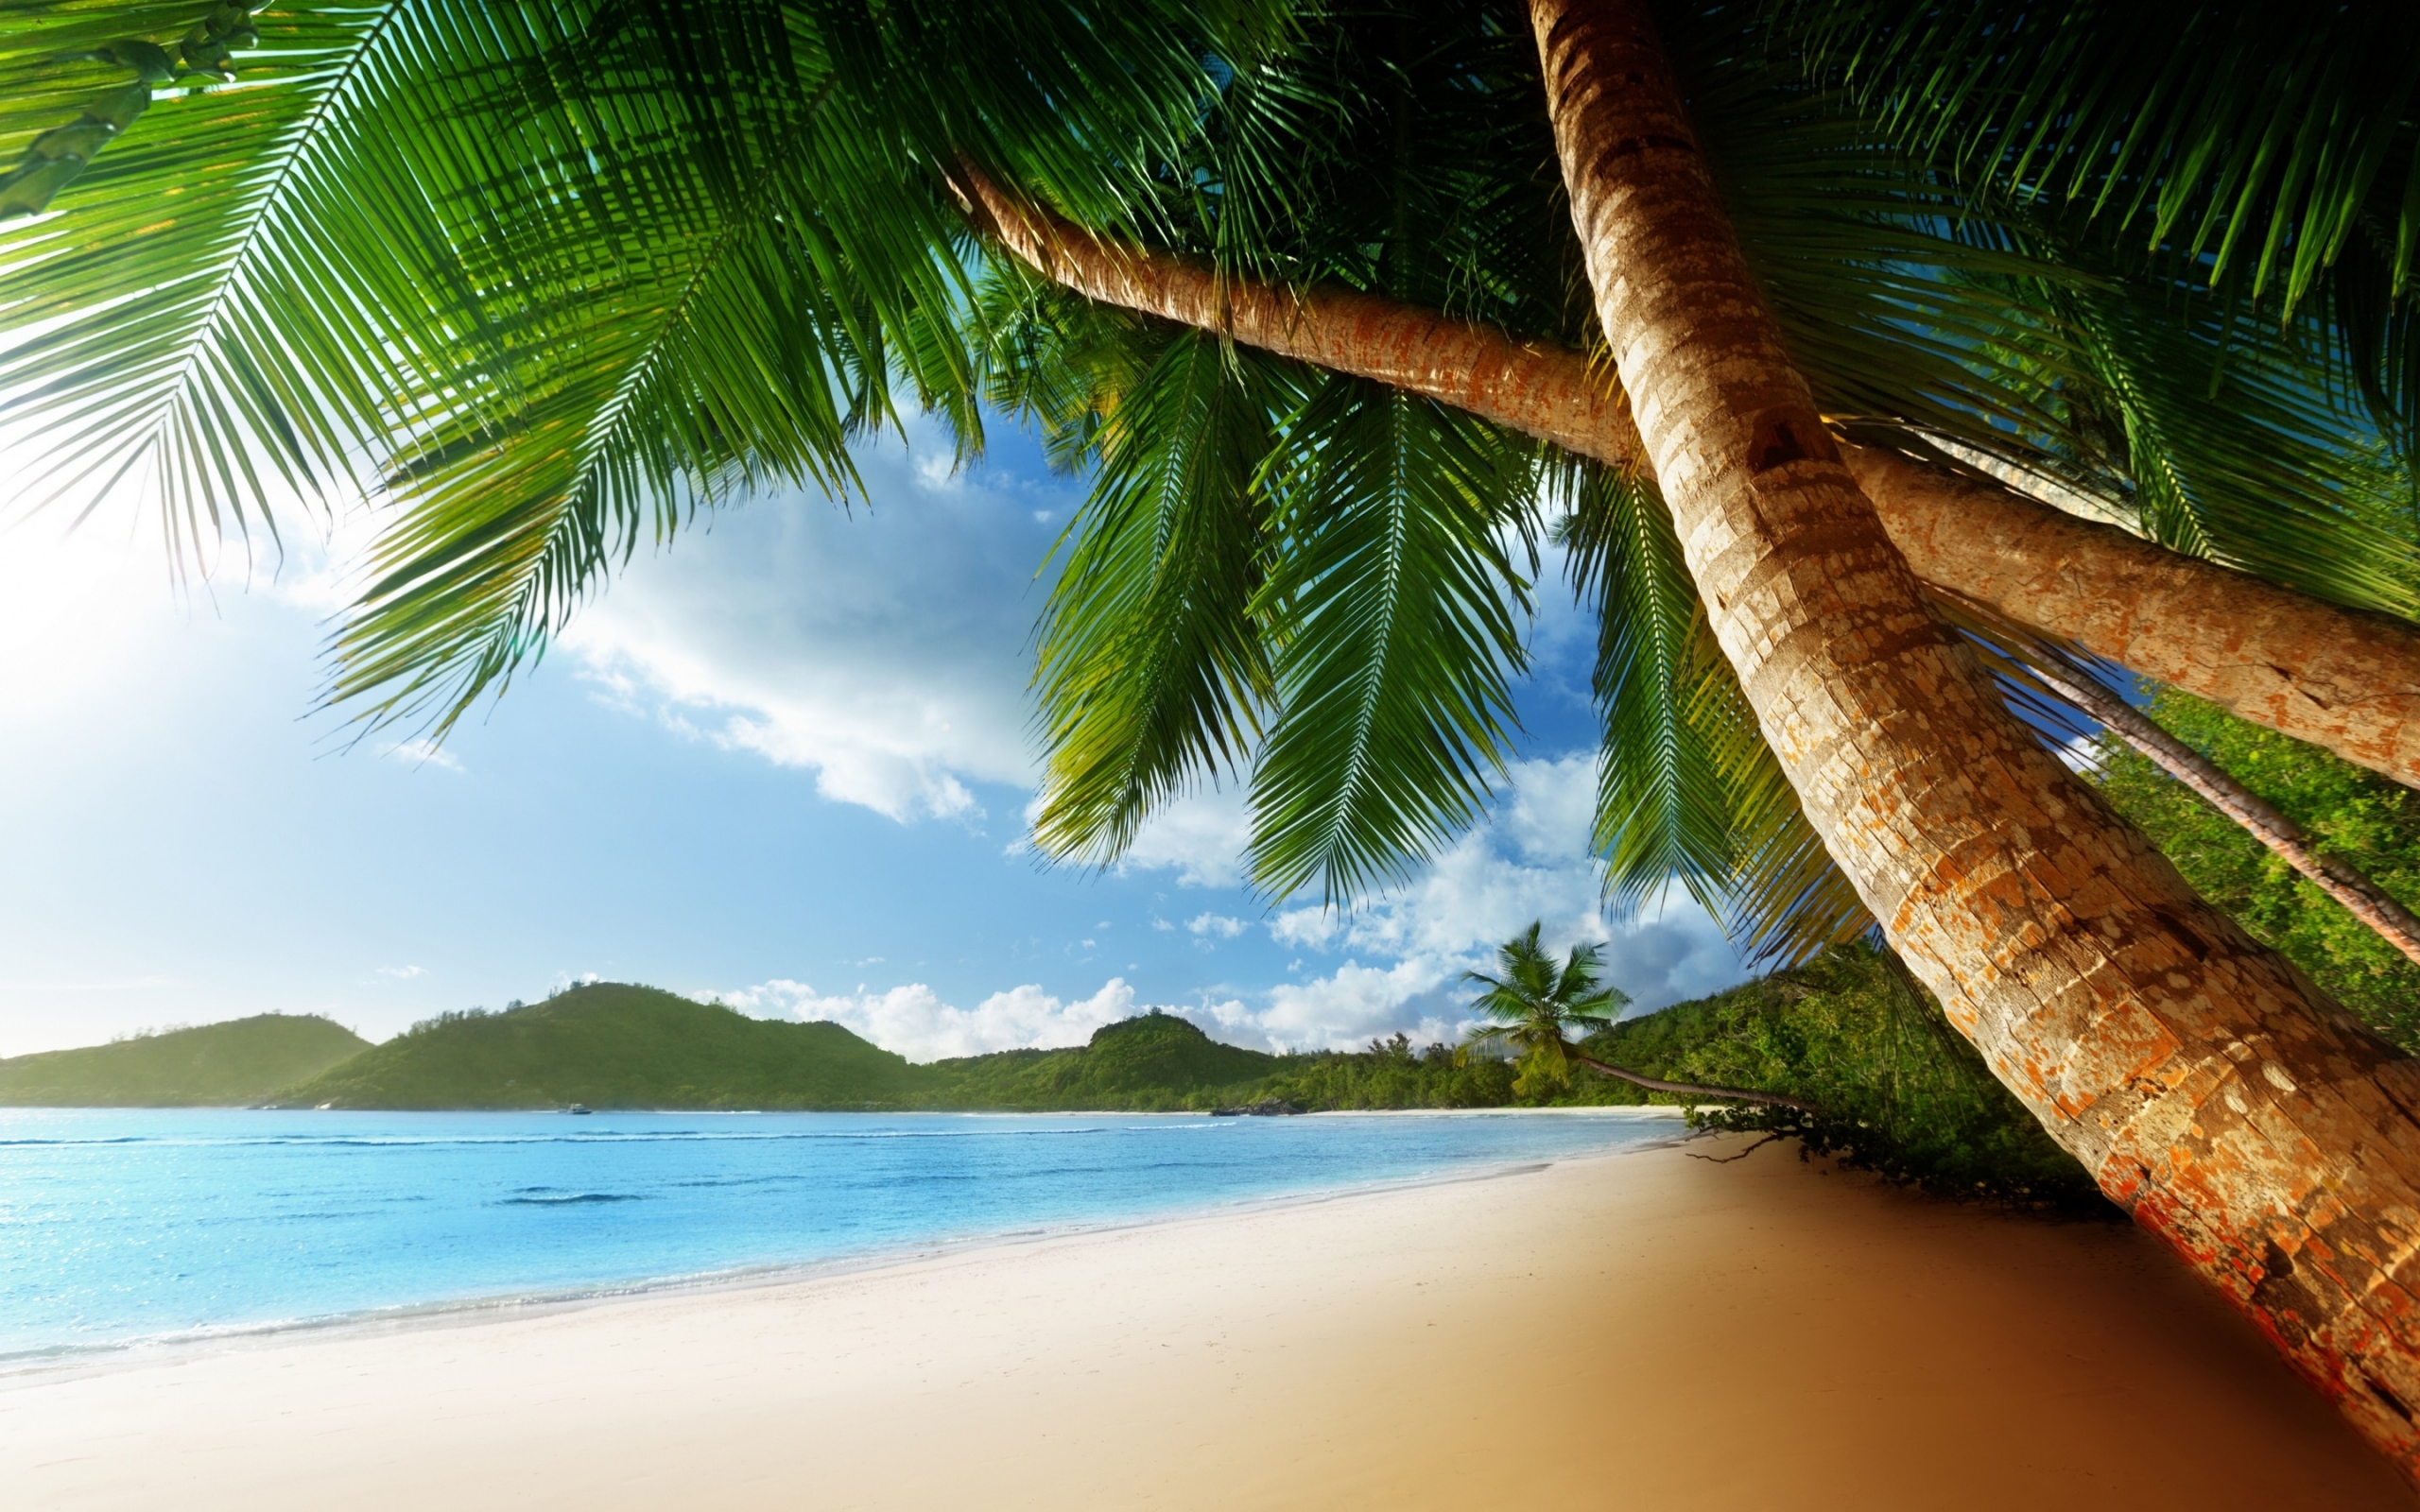 Exotic Palm Island for 2560 x 1600 widescreen resolution